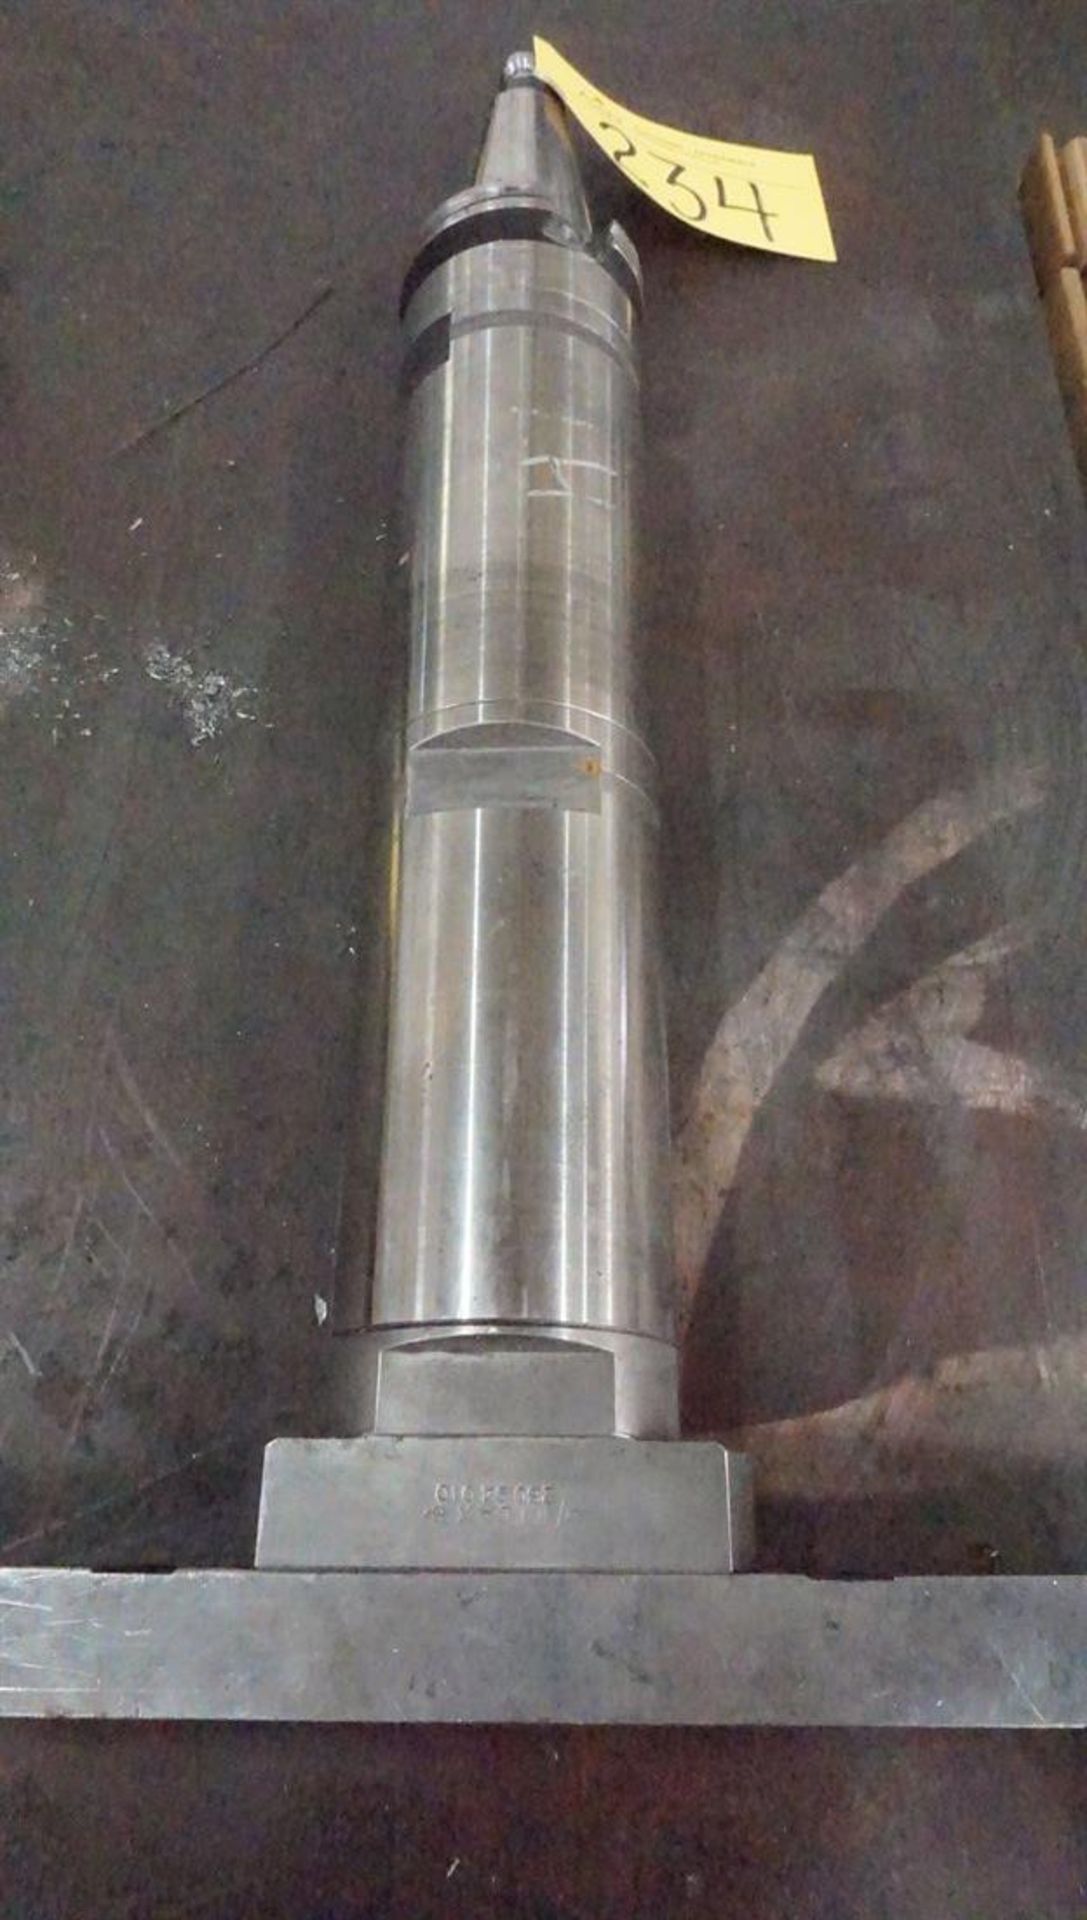 Widax 50 Taper Tool Holder w/ Indexable Tooling - Image 2 of 2